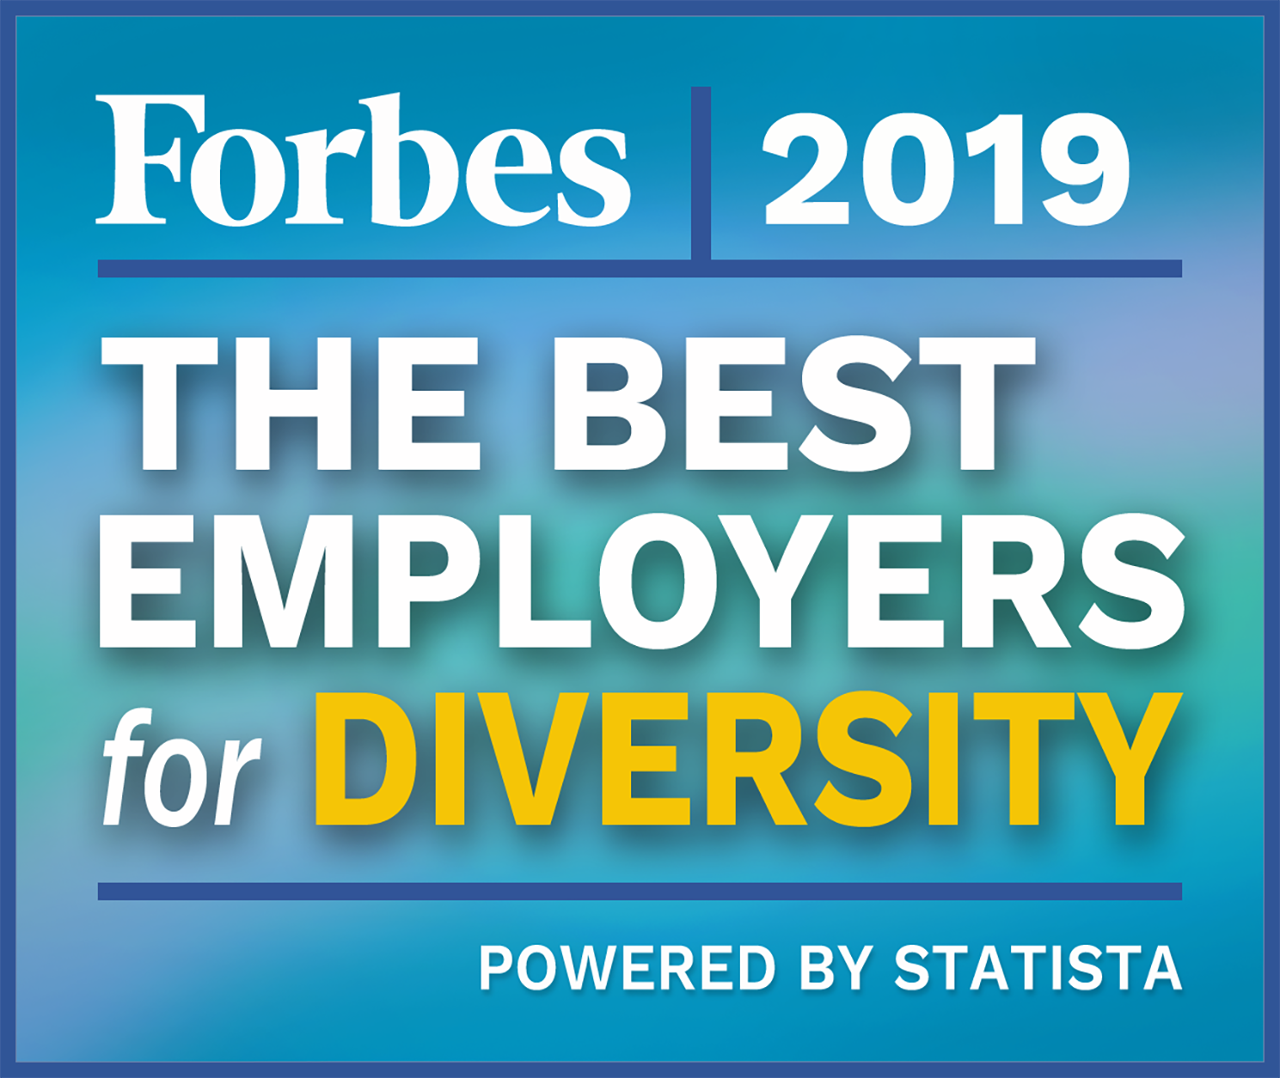 Diversity Award Adds to Acuity's Workplace Recognition